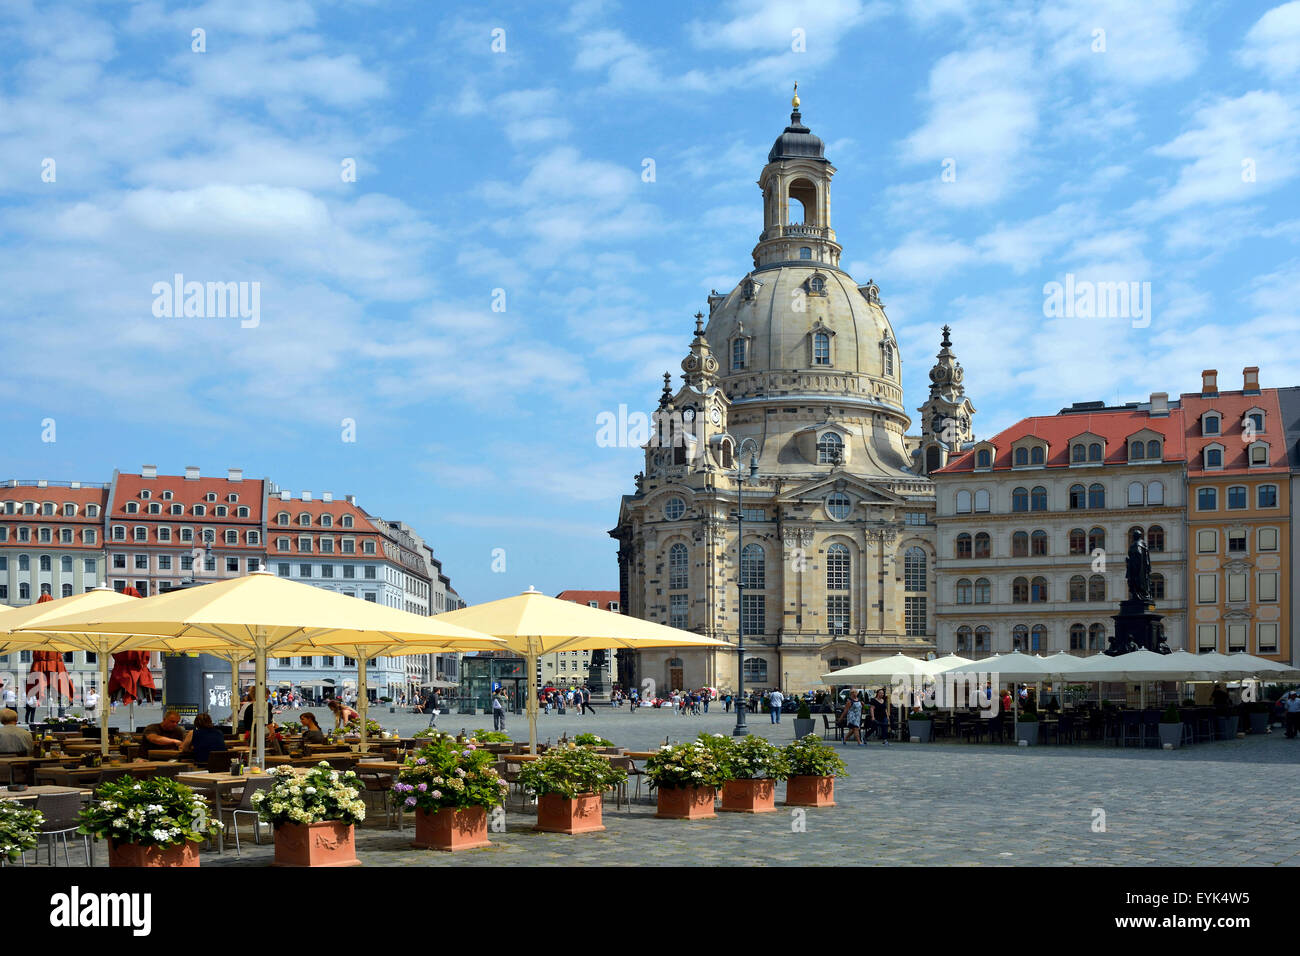 Tourists at the Church of Our Lady on the New Market of Dresden in Germany. Stock Photo